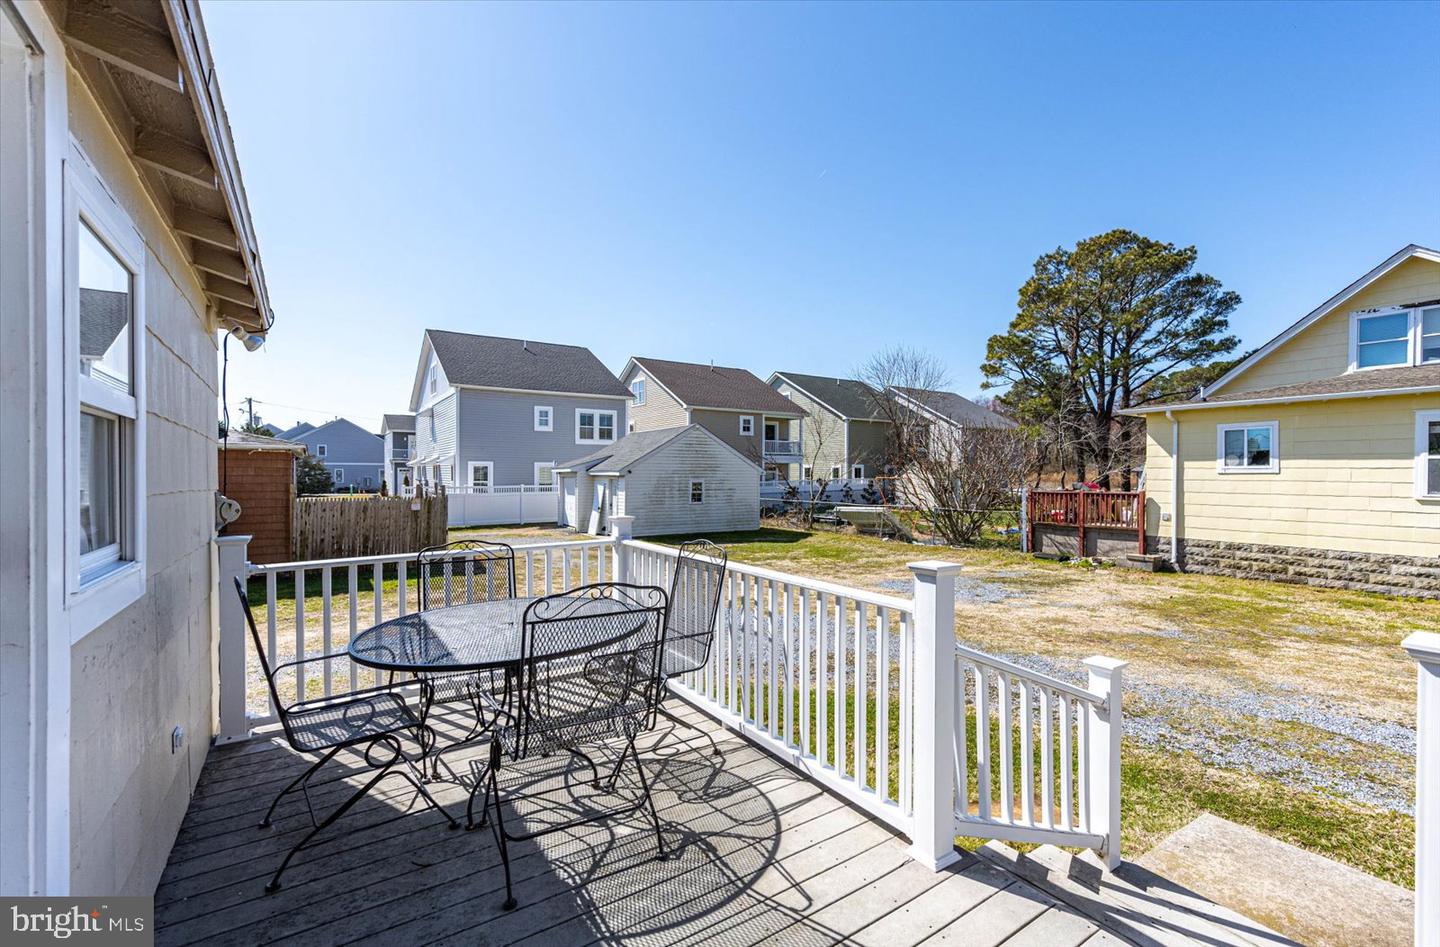 MDWO2019446-802902744696-2024-03-07-00-08-06 9801 / 9805 Golf Course Rd | Ocean City, MD Real Estate For Sale | MLS# Mdwo2019446  - 1st Choice Properties